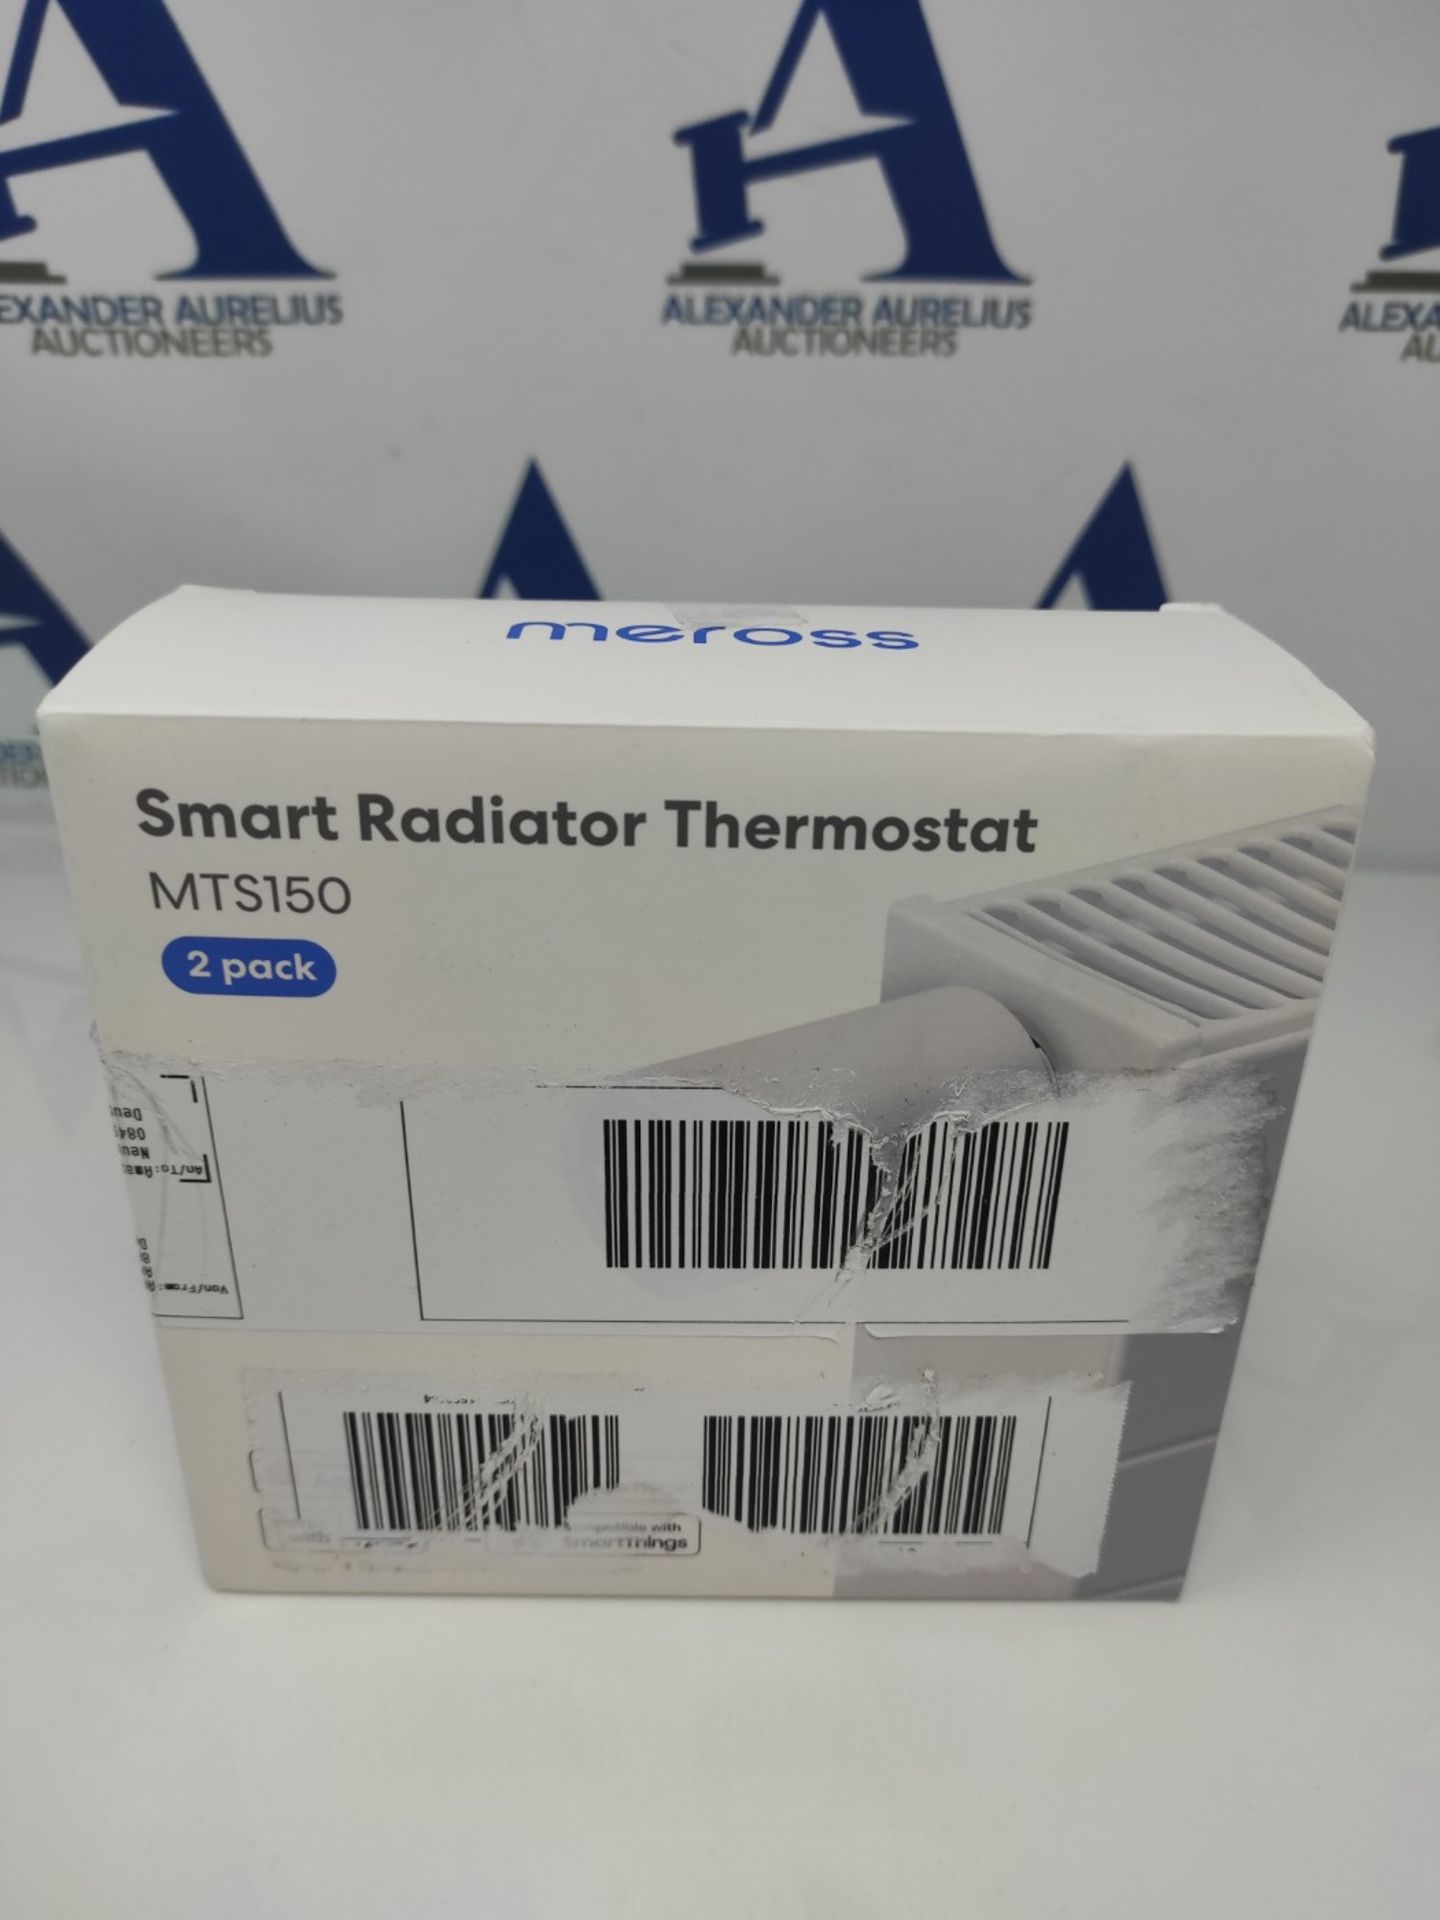 RRP £69.00 Meross WLAN Heating Thermostat compatible with HomeKit, smart radiator thermostat requ - Image 3 of 3